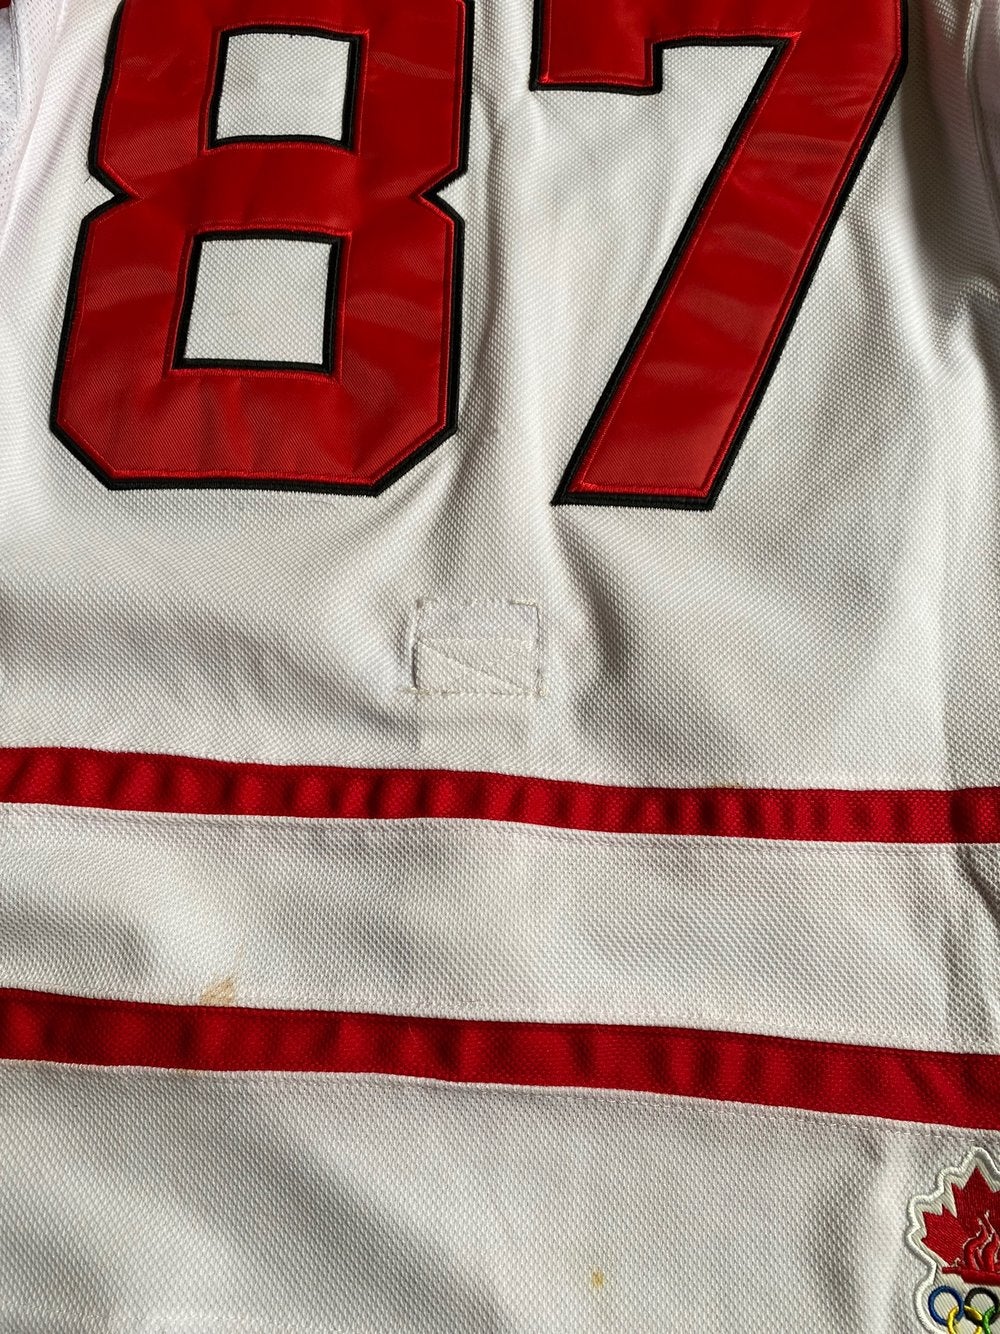 SIDNEY CROSBY 2010 TEAM CANADA JERSEY SIZE X-LARGE PEGUINS